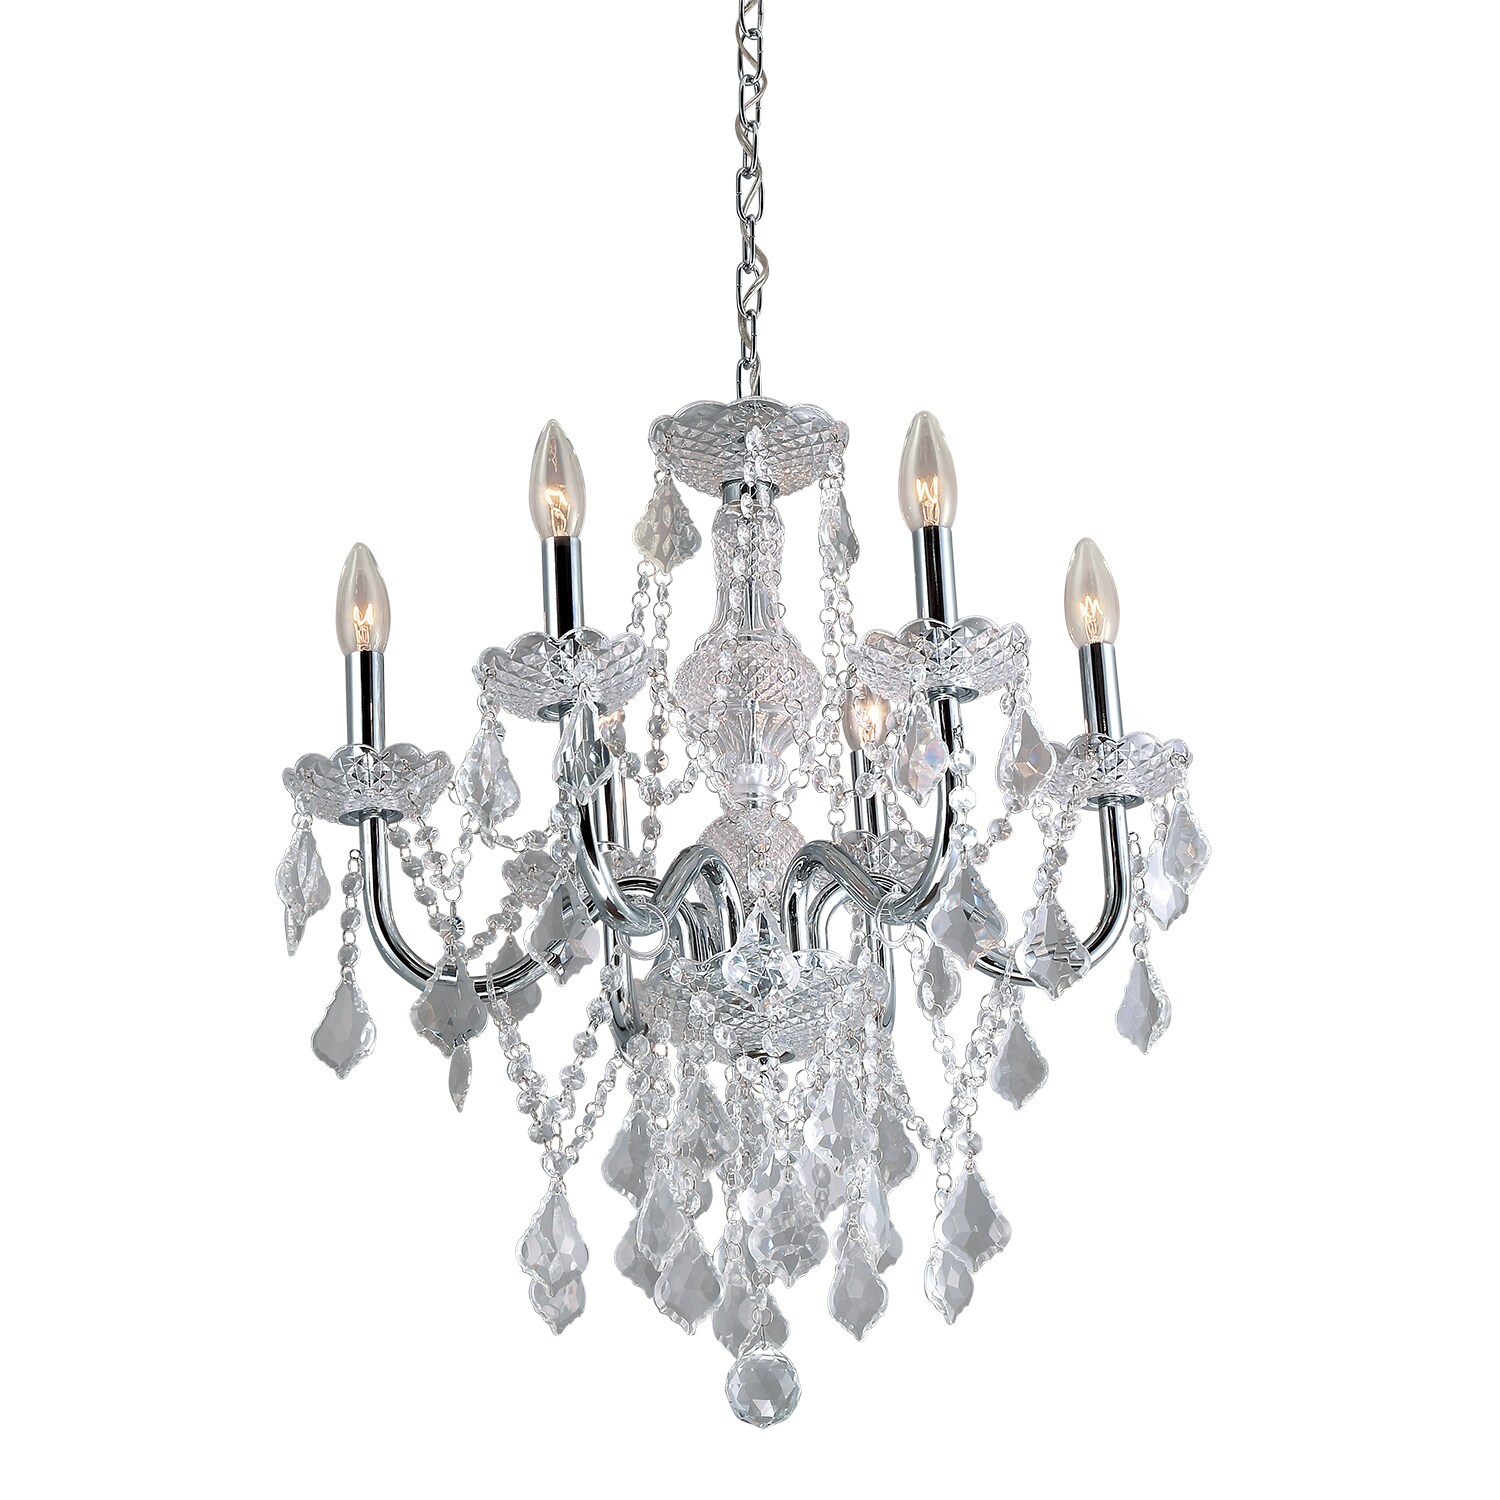 Polished Chrome Finish K9 Crystal Chandelier Wall Sconce Crystal Wall Lamp 